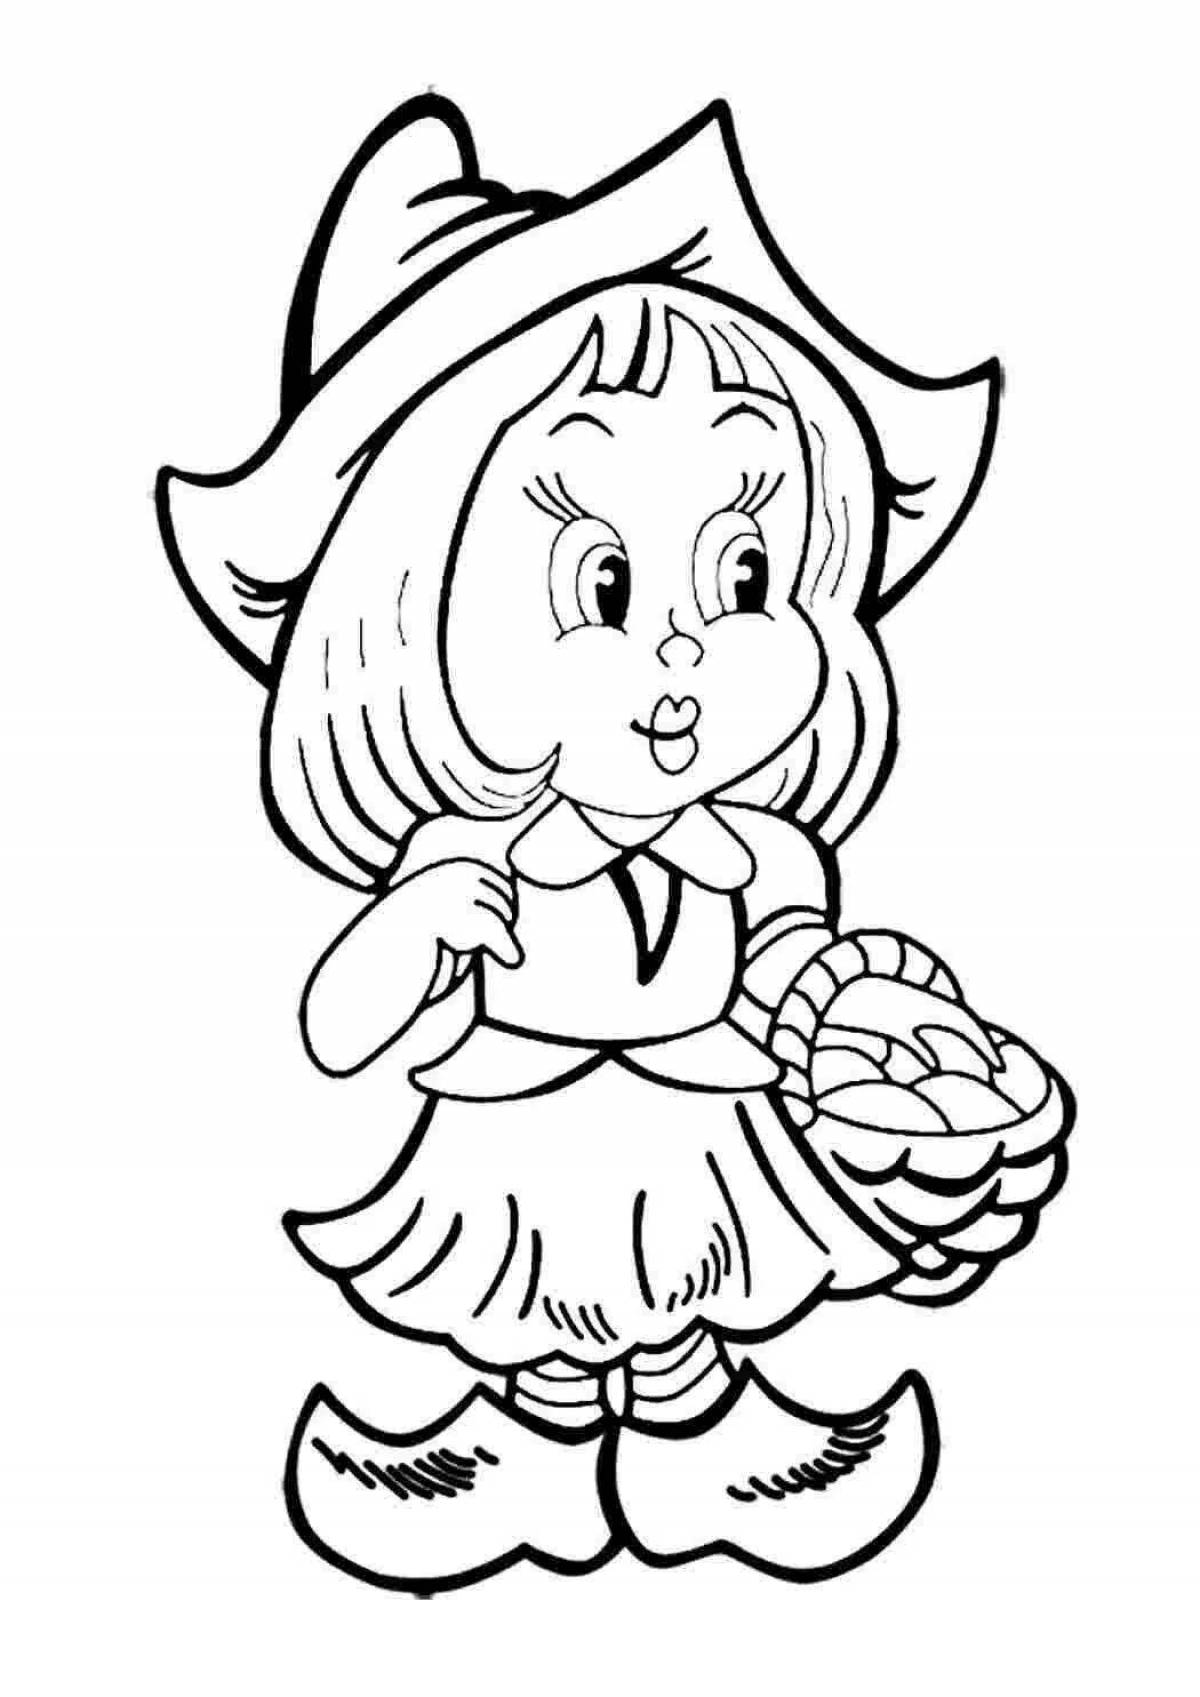 Playtime little red riding hood coloring